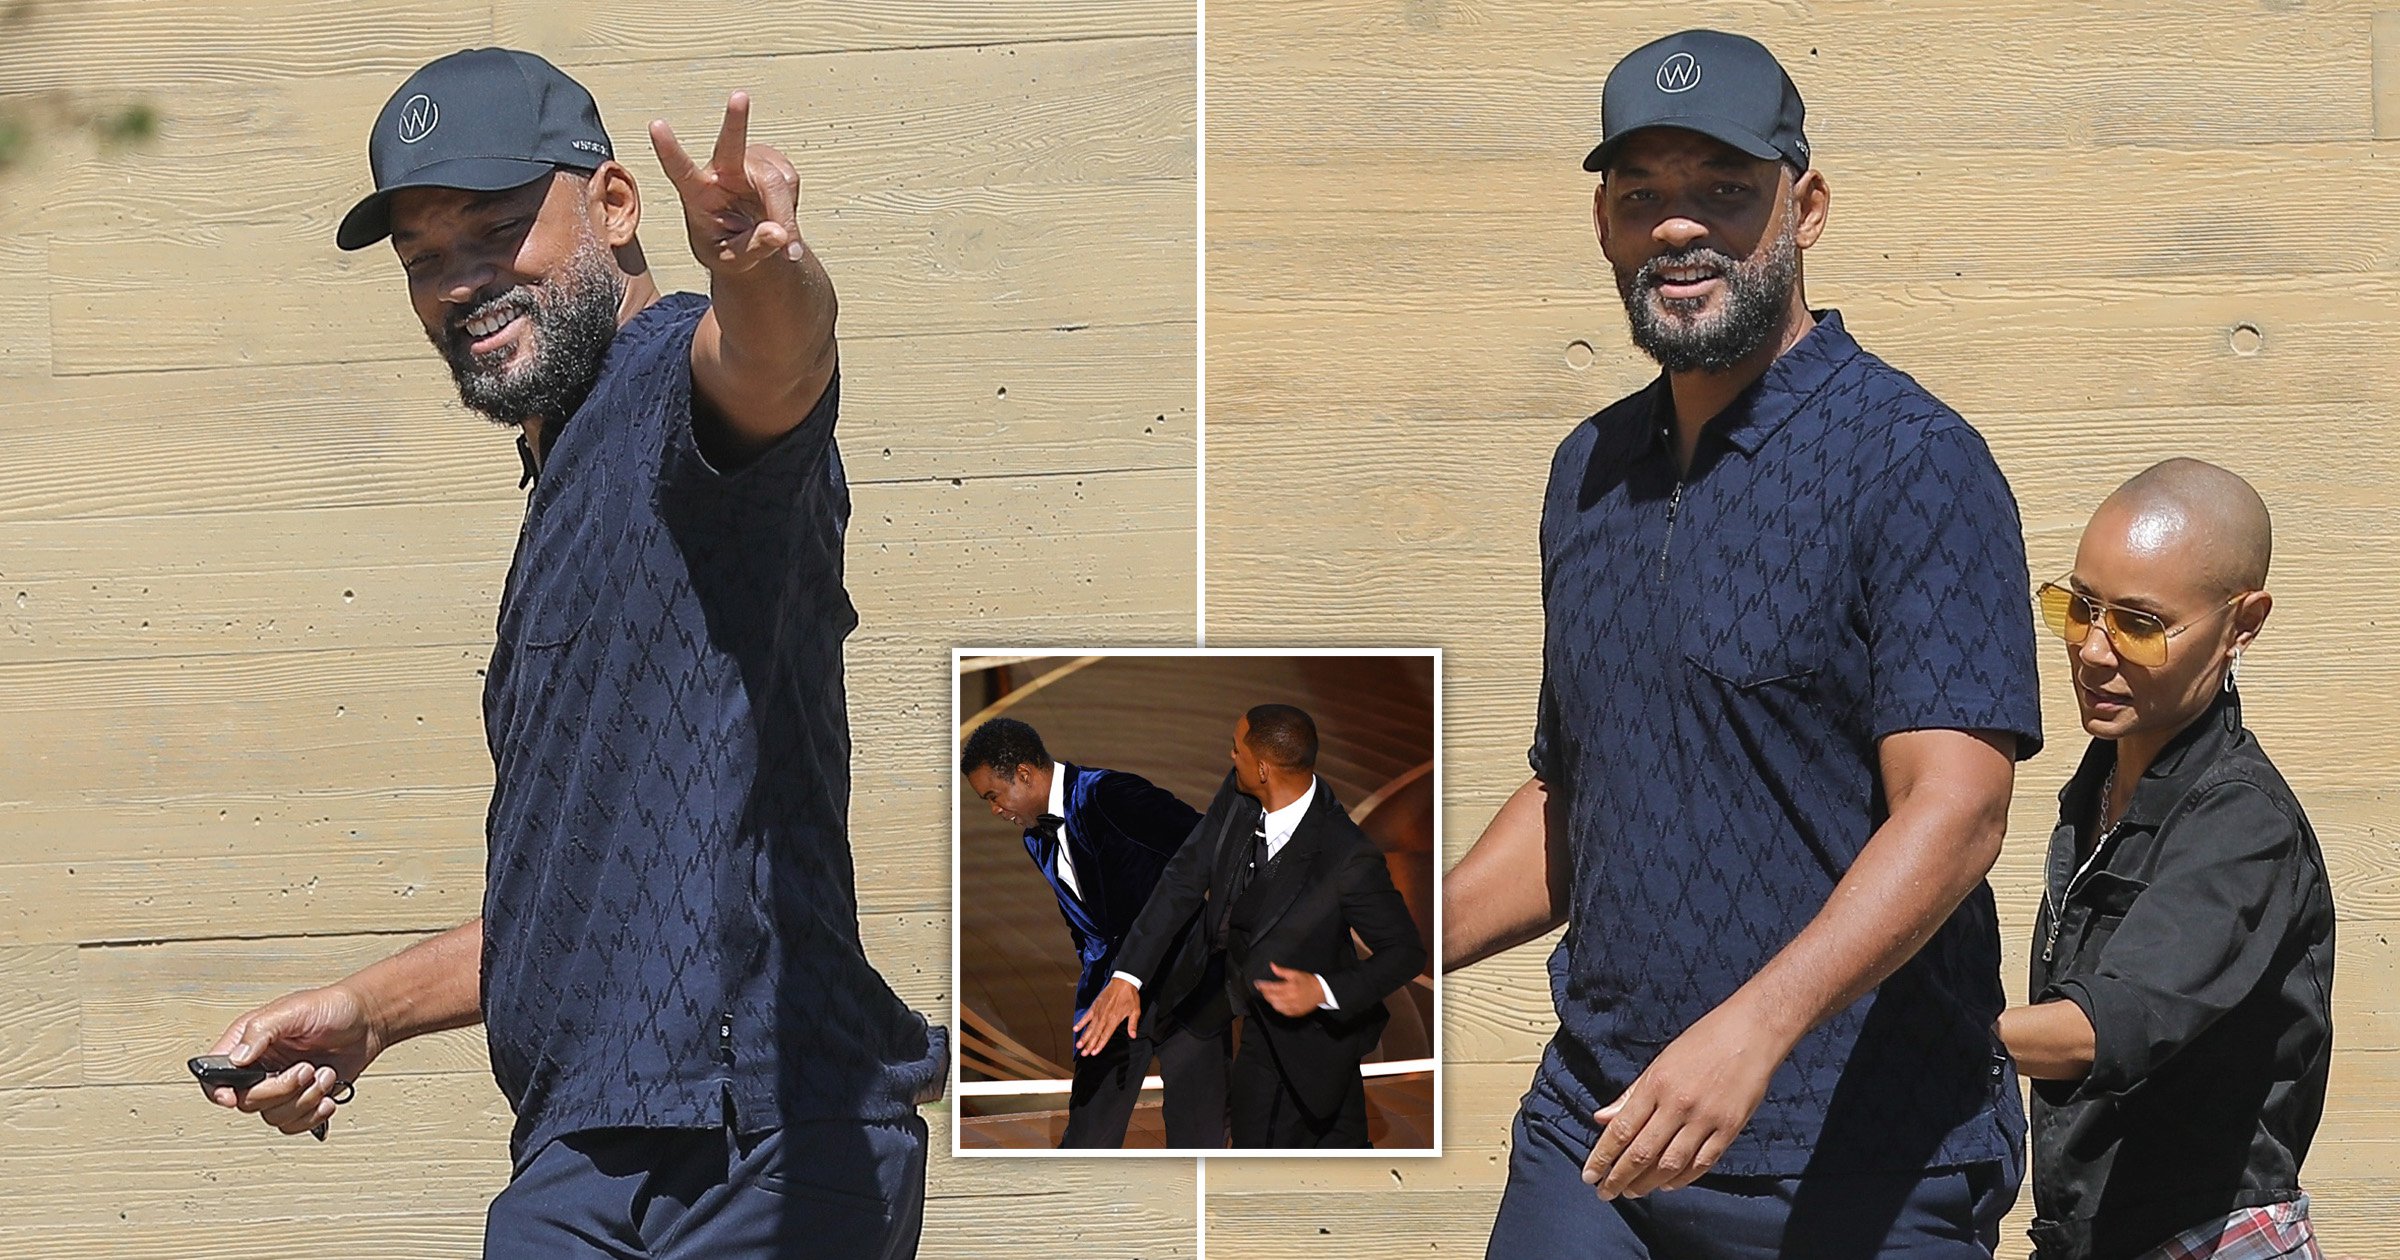 Will Smith flashes peace sign during first public outing with wife Jada Pinkett Smith since Oscars slap